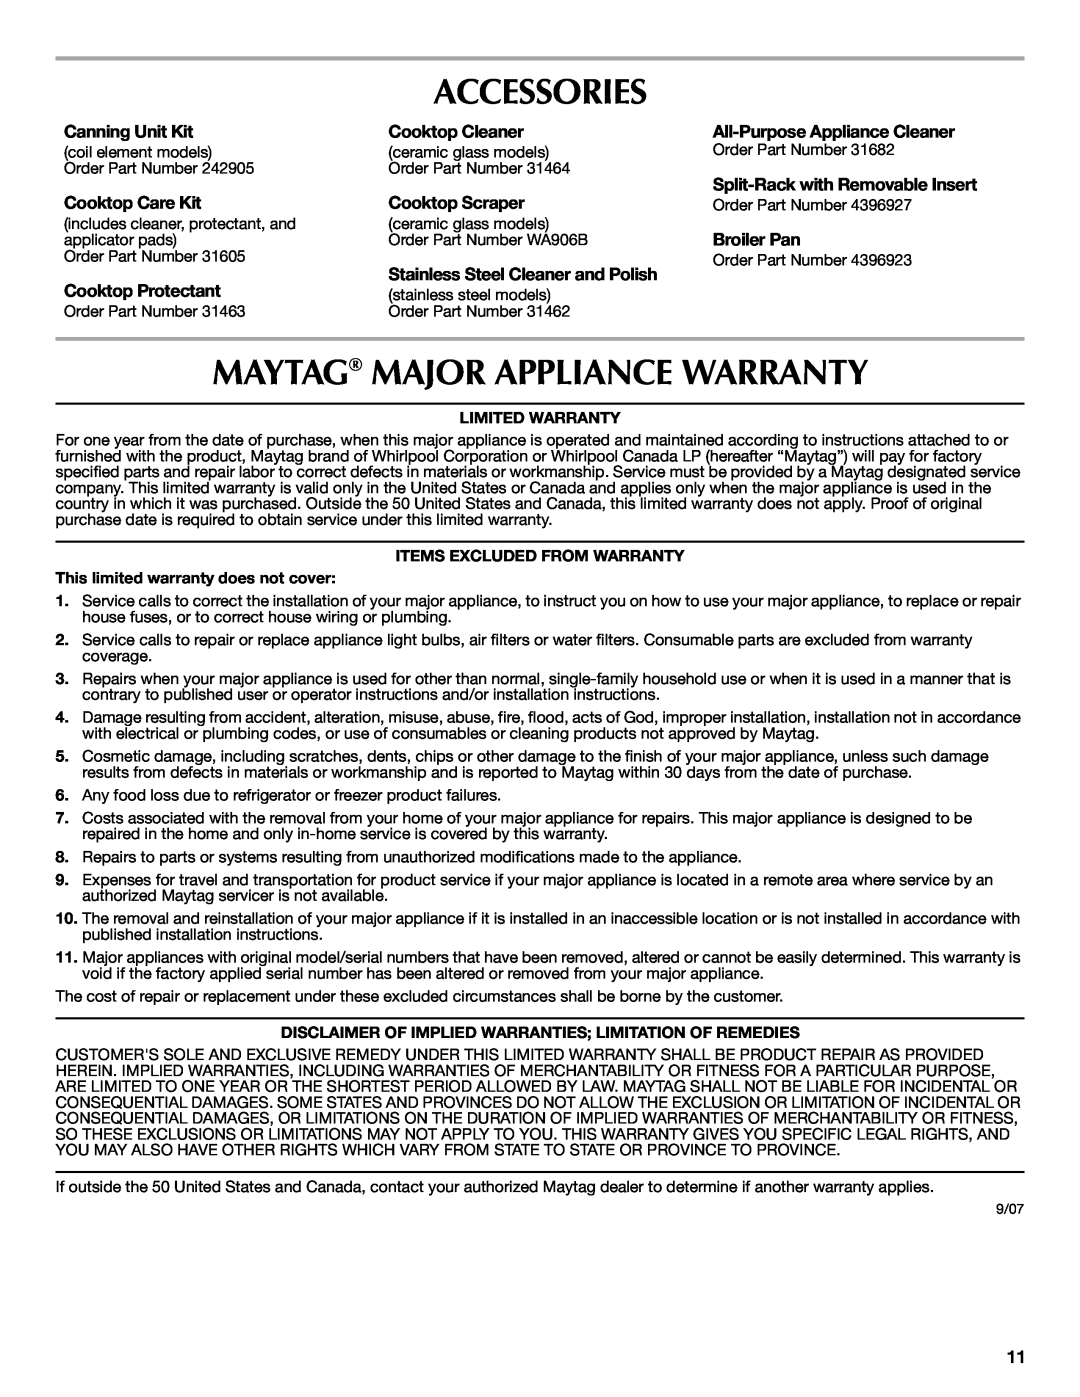 Maytag W10238819A Accessories, Maytag Major Appliance Warranty, Canning Unit Kit, Cooktop Cleaner, Cooktop Care Kit 